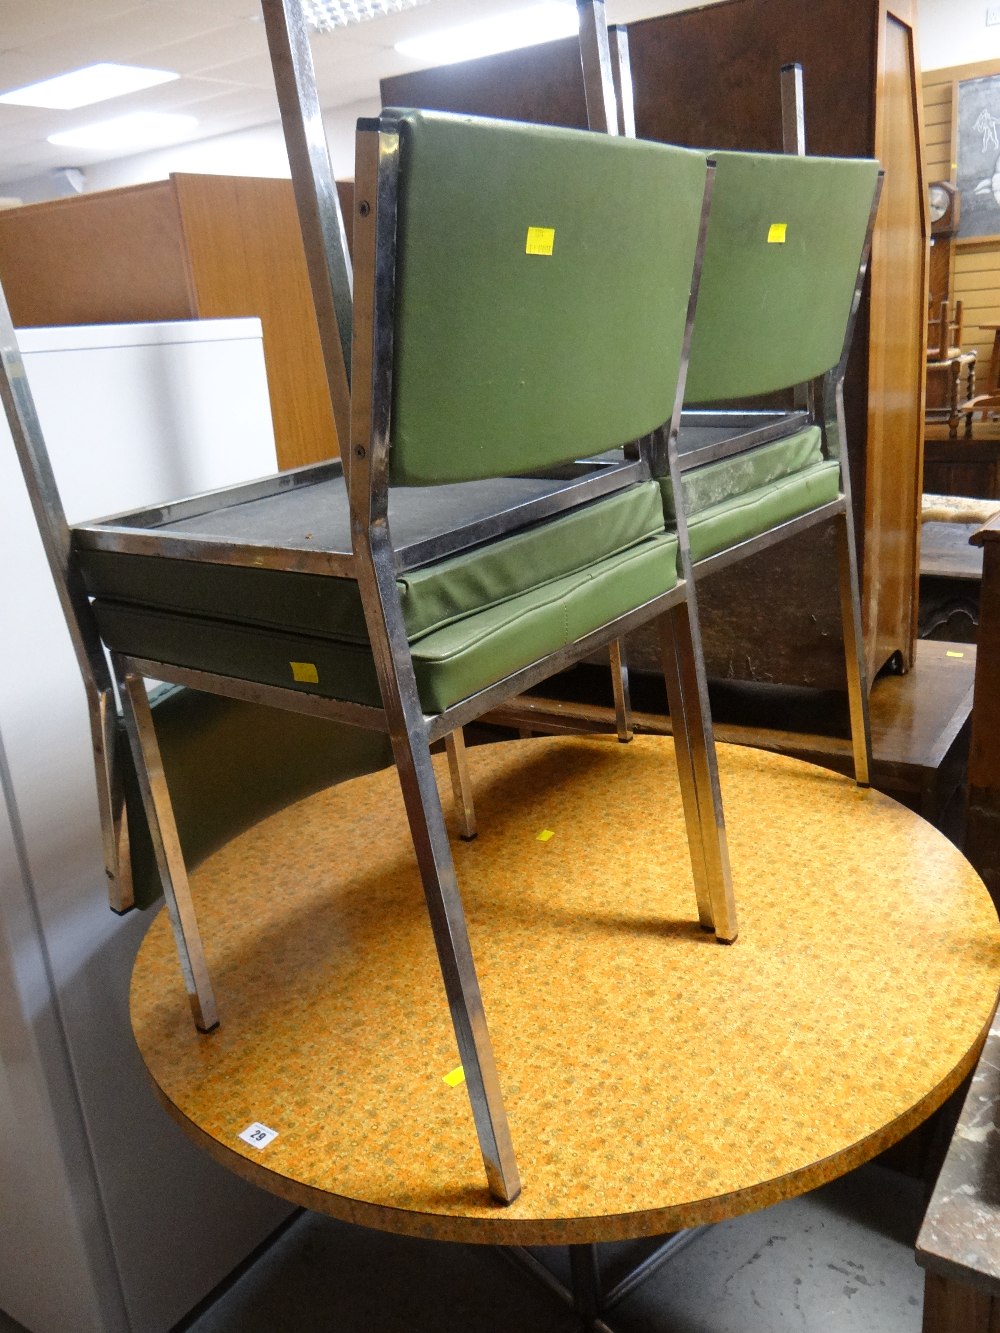 A wonderfully retro floral Formica topped circular breakfast table & four retro similar period